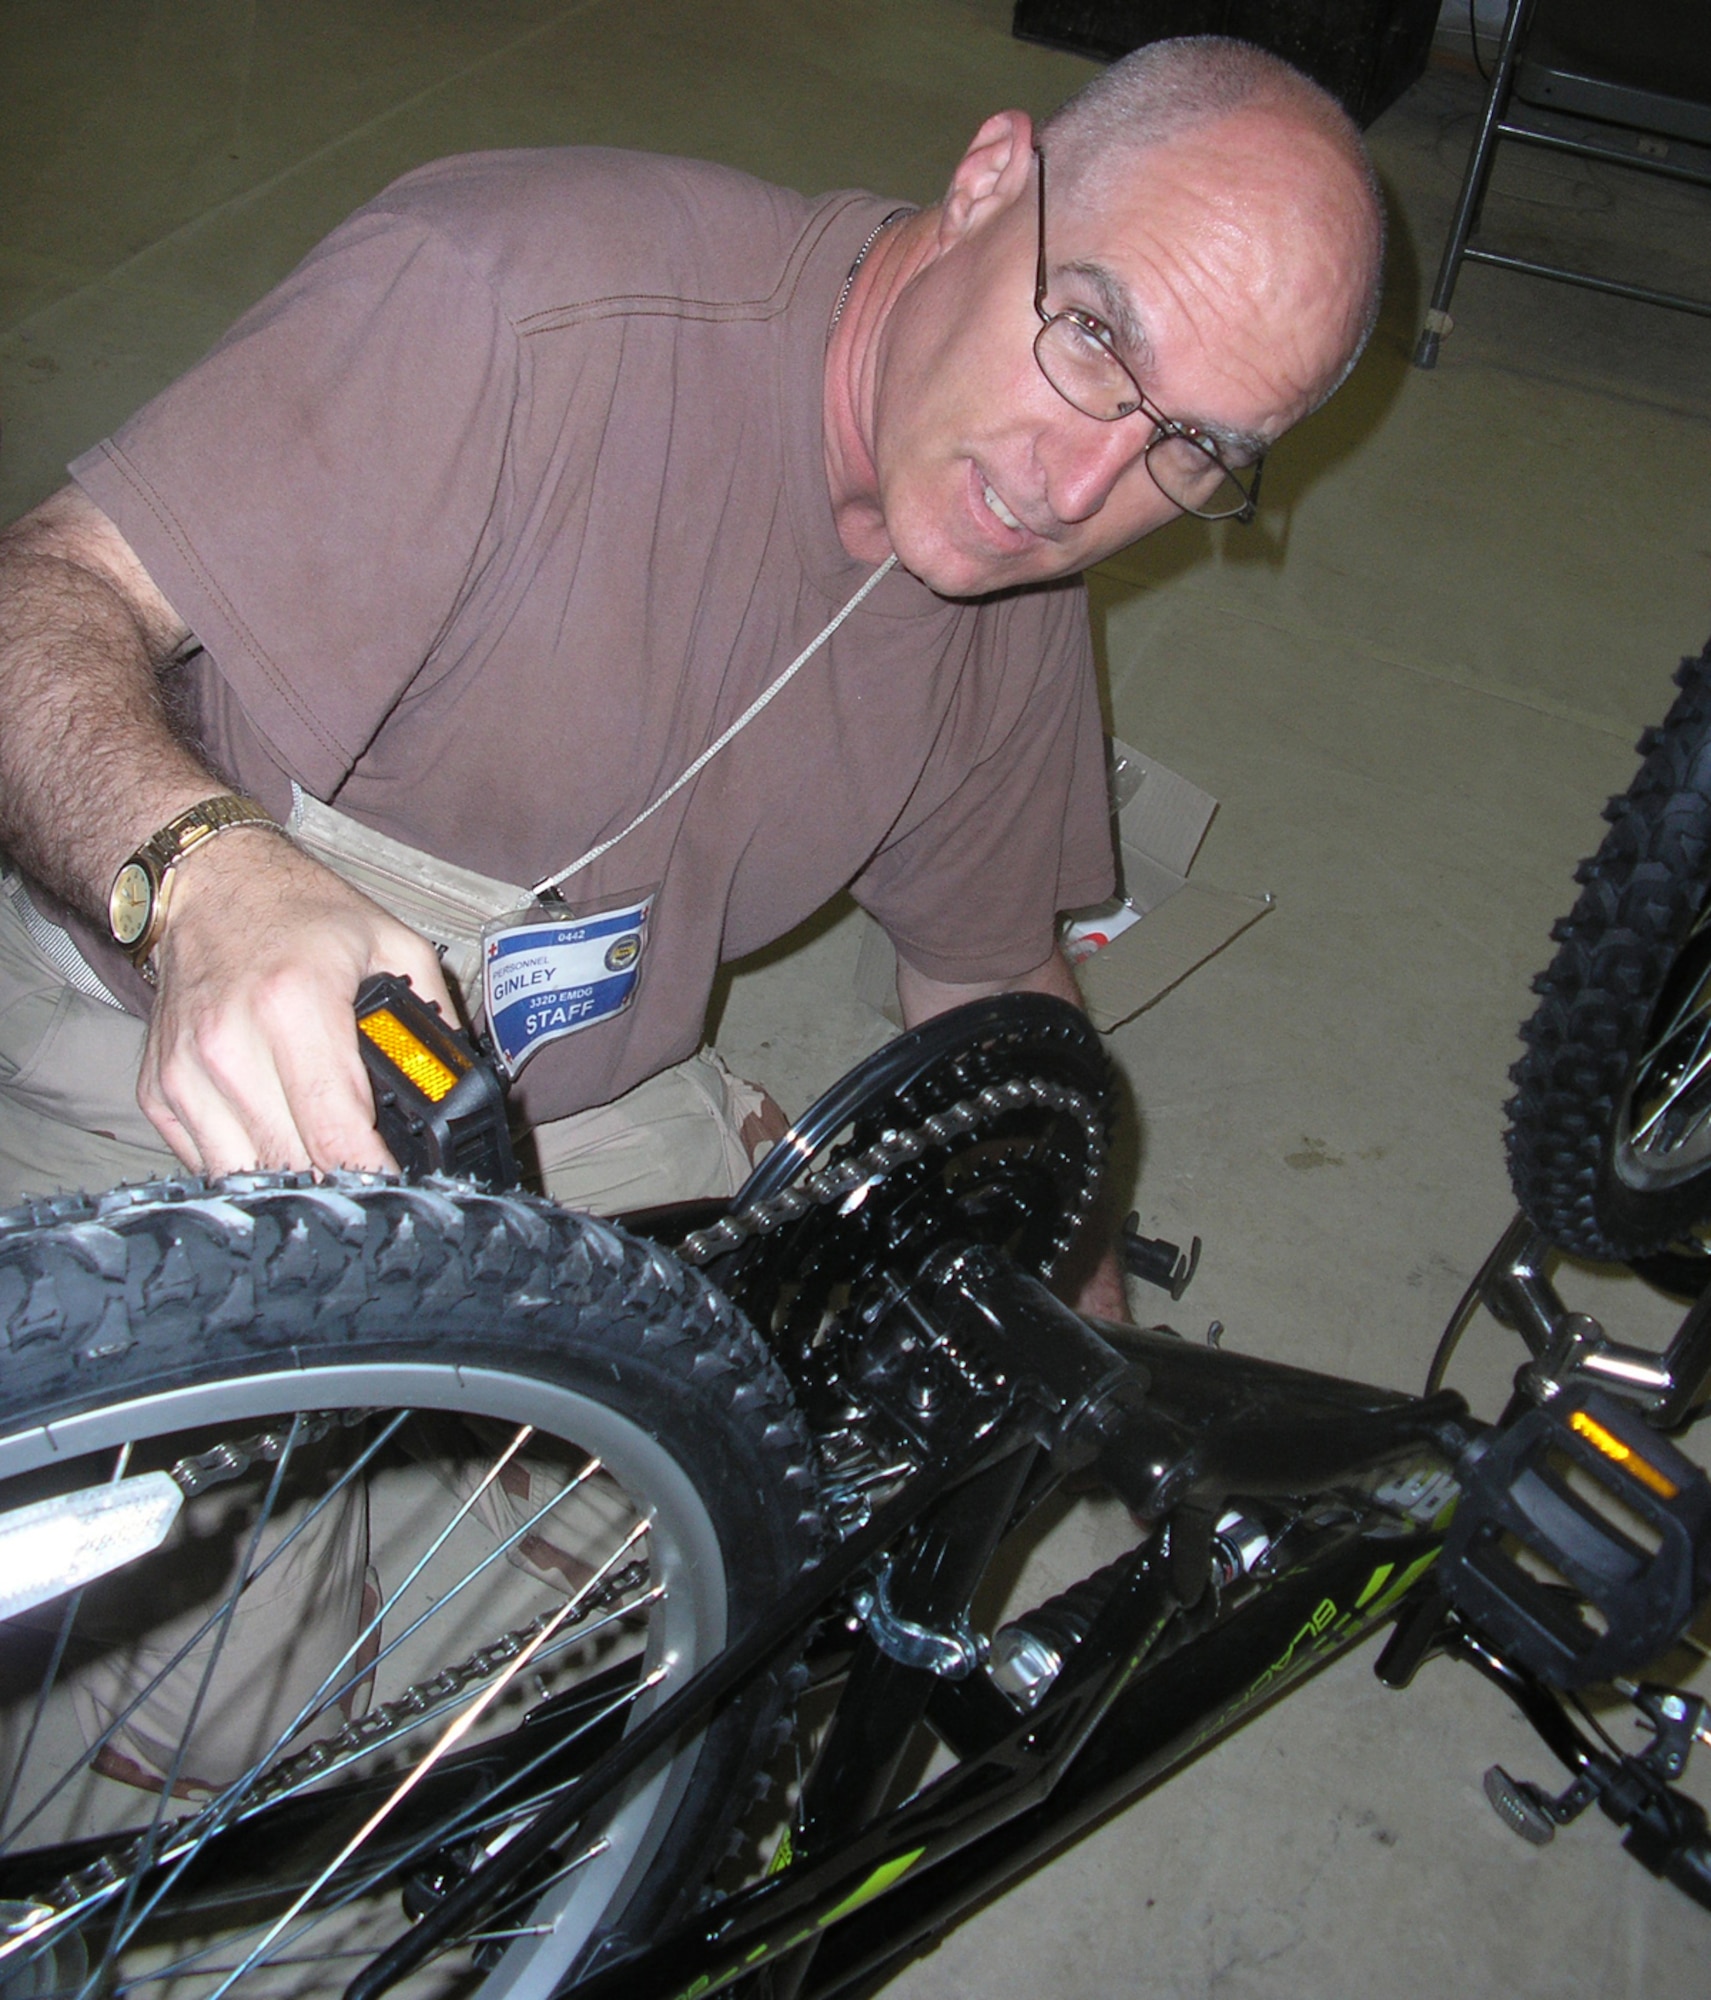 Balad Air Base, Iraq -- Air Force Reserve Major Patrick Ginley, an Air Force Physician's Assistant serving at the Air Force Theater Hospital here has also become known as the "Bicycle Man."  In his off-duty time, Maj. Ginley assembles and repairs bicycles and provides them to his fellow Airmen to use for transportation around the base.  U.S. Air Force photo/Tech. Sgt. Allan Folson